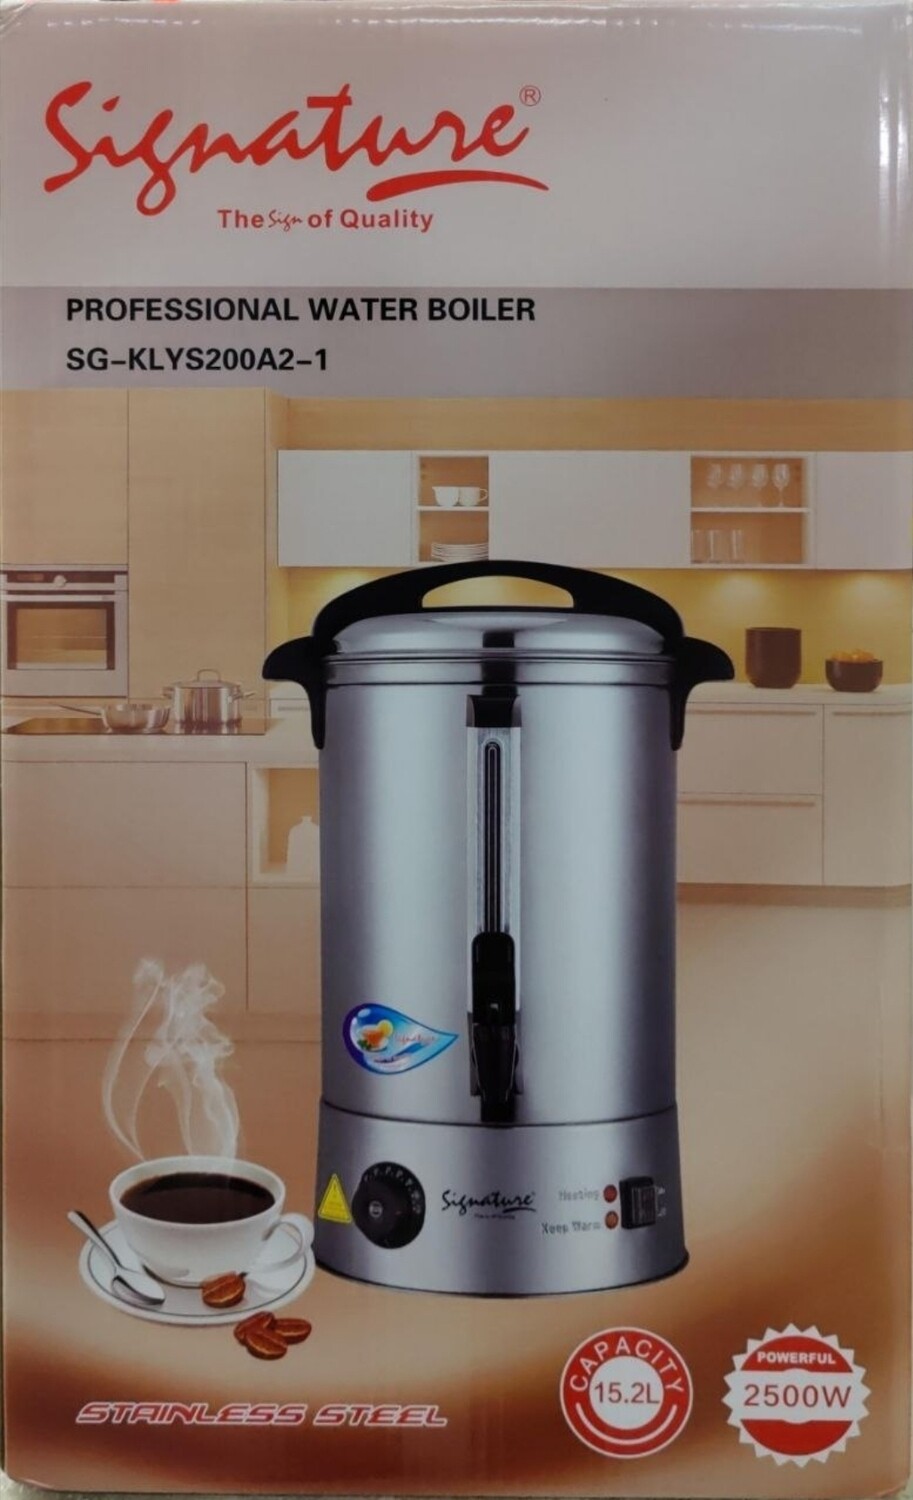 Signature 15.2 Ltr Electric Water/Tea Boiler Heavy duty, Stainless Steel, Professional uses SG-KLYS200A2-1 (2500W)